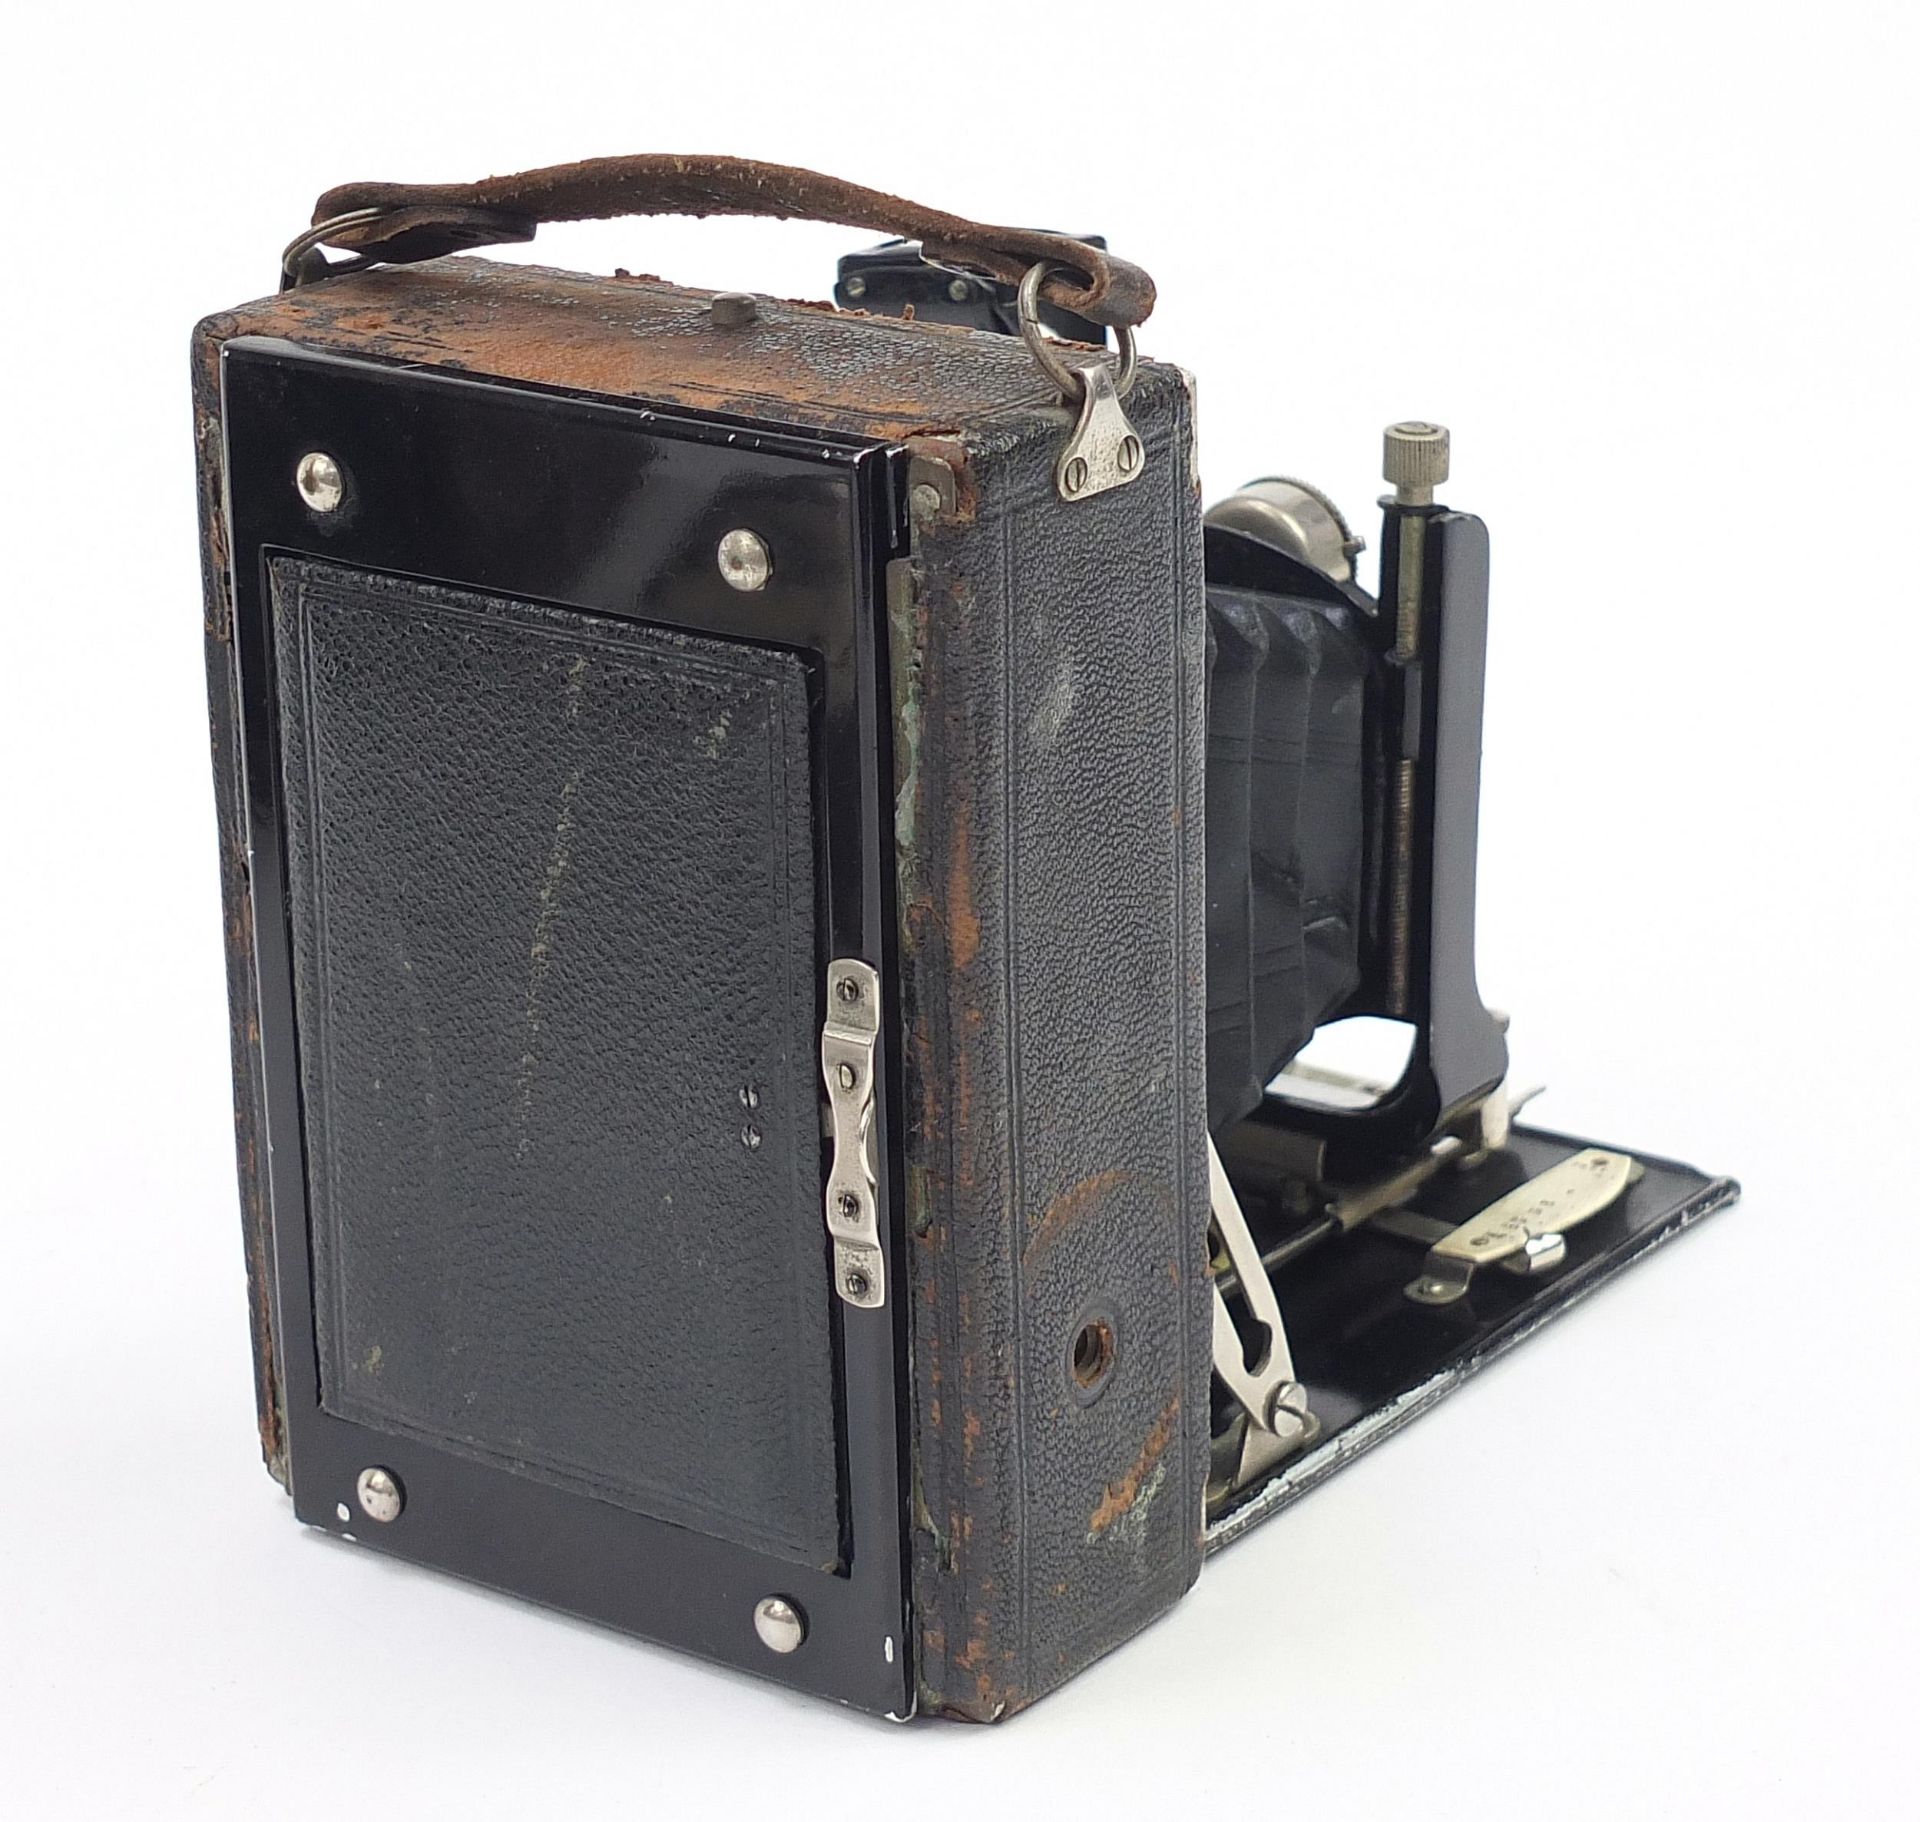 Early 20th century Thornton Pickard Imperial pocket plate camera with leather case - Image 4 of 4